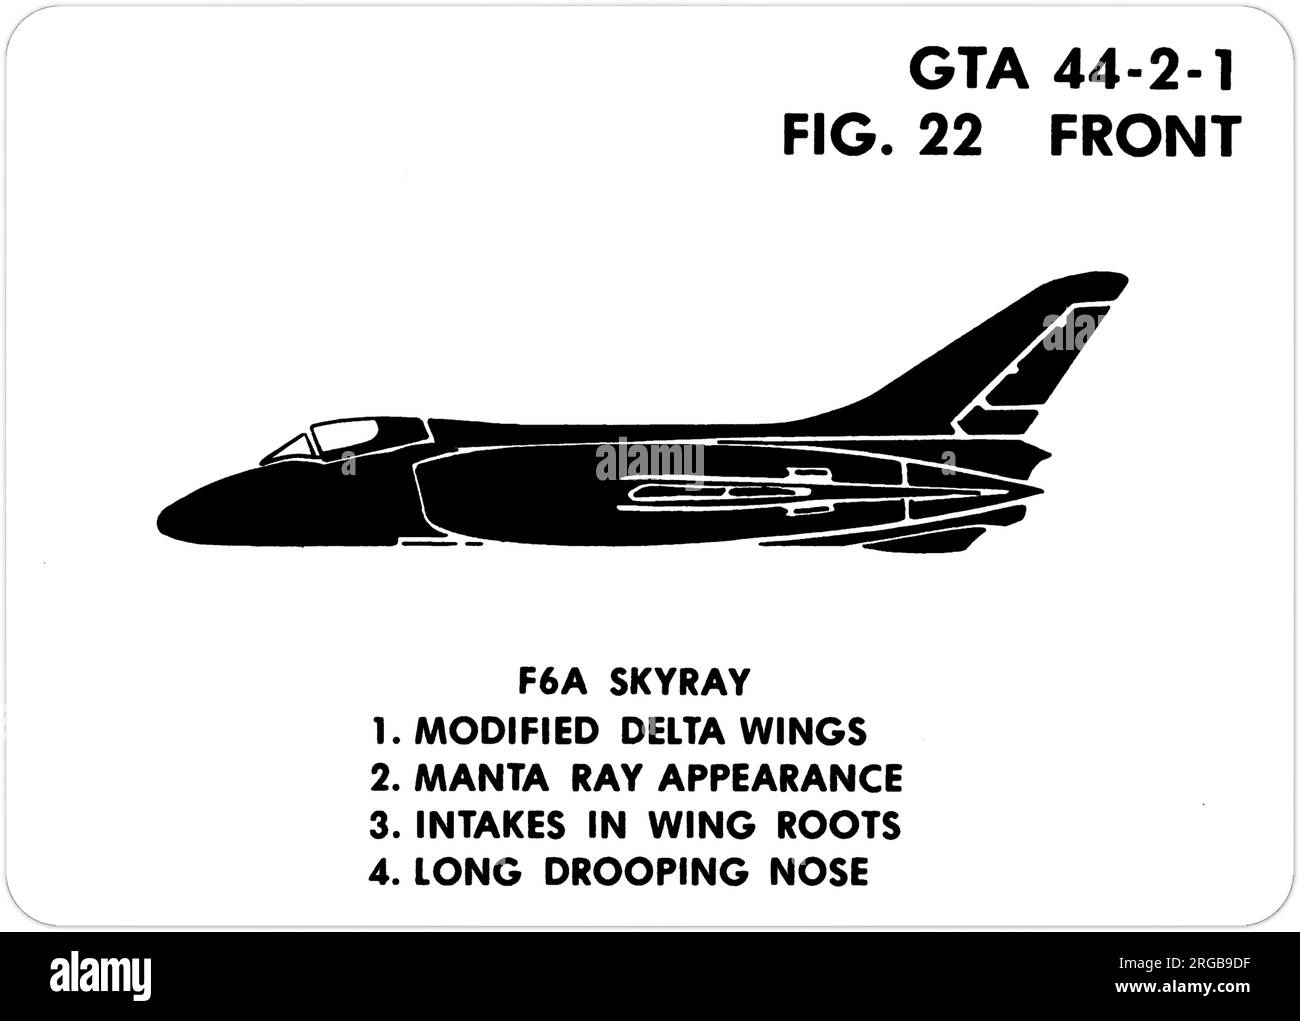 Douglas F4D-1 Skyray (re-designated F-6A in 1962 despite not being in service). This is one of the series of Graphics Training Aids (GTA) used by the United States Army to train their personnel to recognize friendly and hostile aircraft. This particular set, GTA 44-2-1, was issued in July1977. The set features aircraft from: Canada, Italy, United Kingdom, United States, and the USSR. Stock Photo